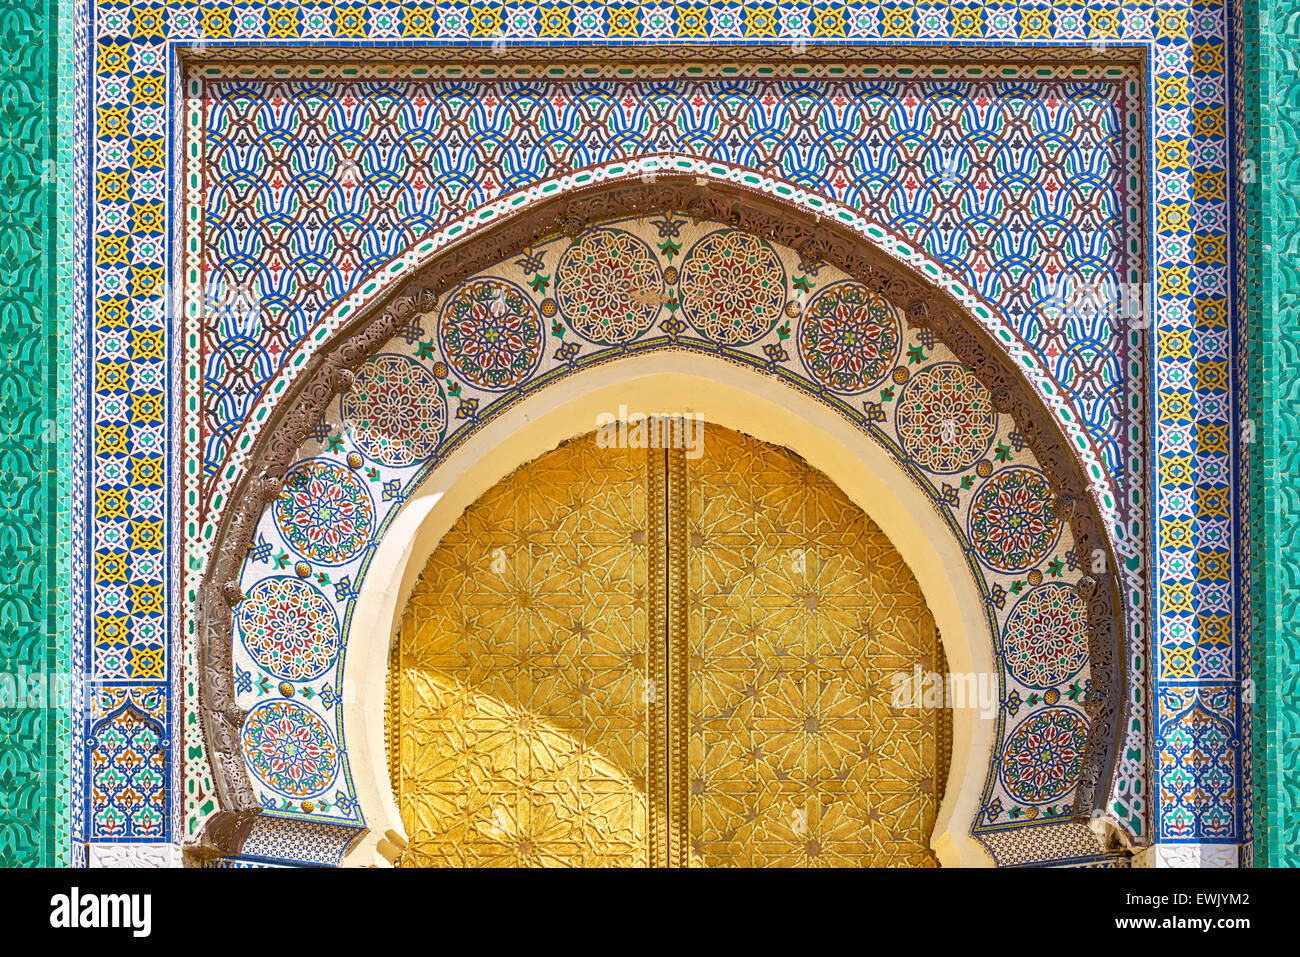 Mosaic tile detail, The Royal Palace in Fez, Morocco, Africa Stock Photo